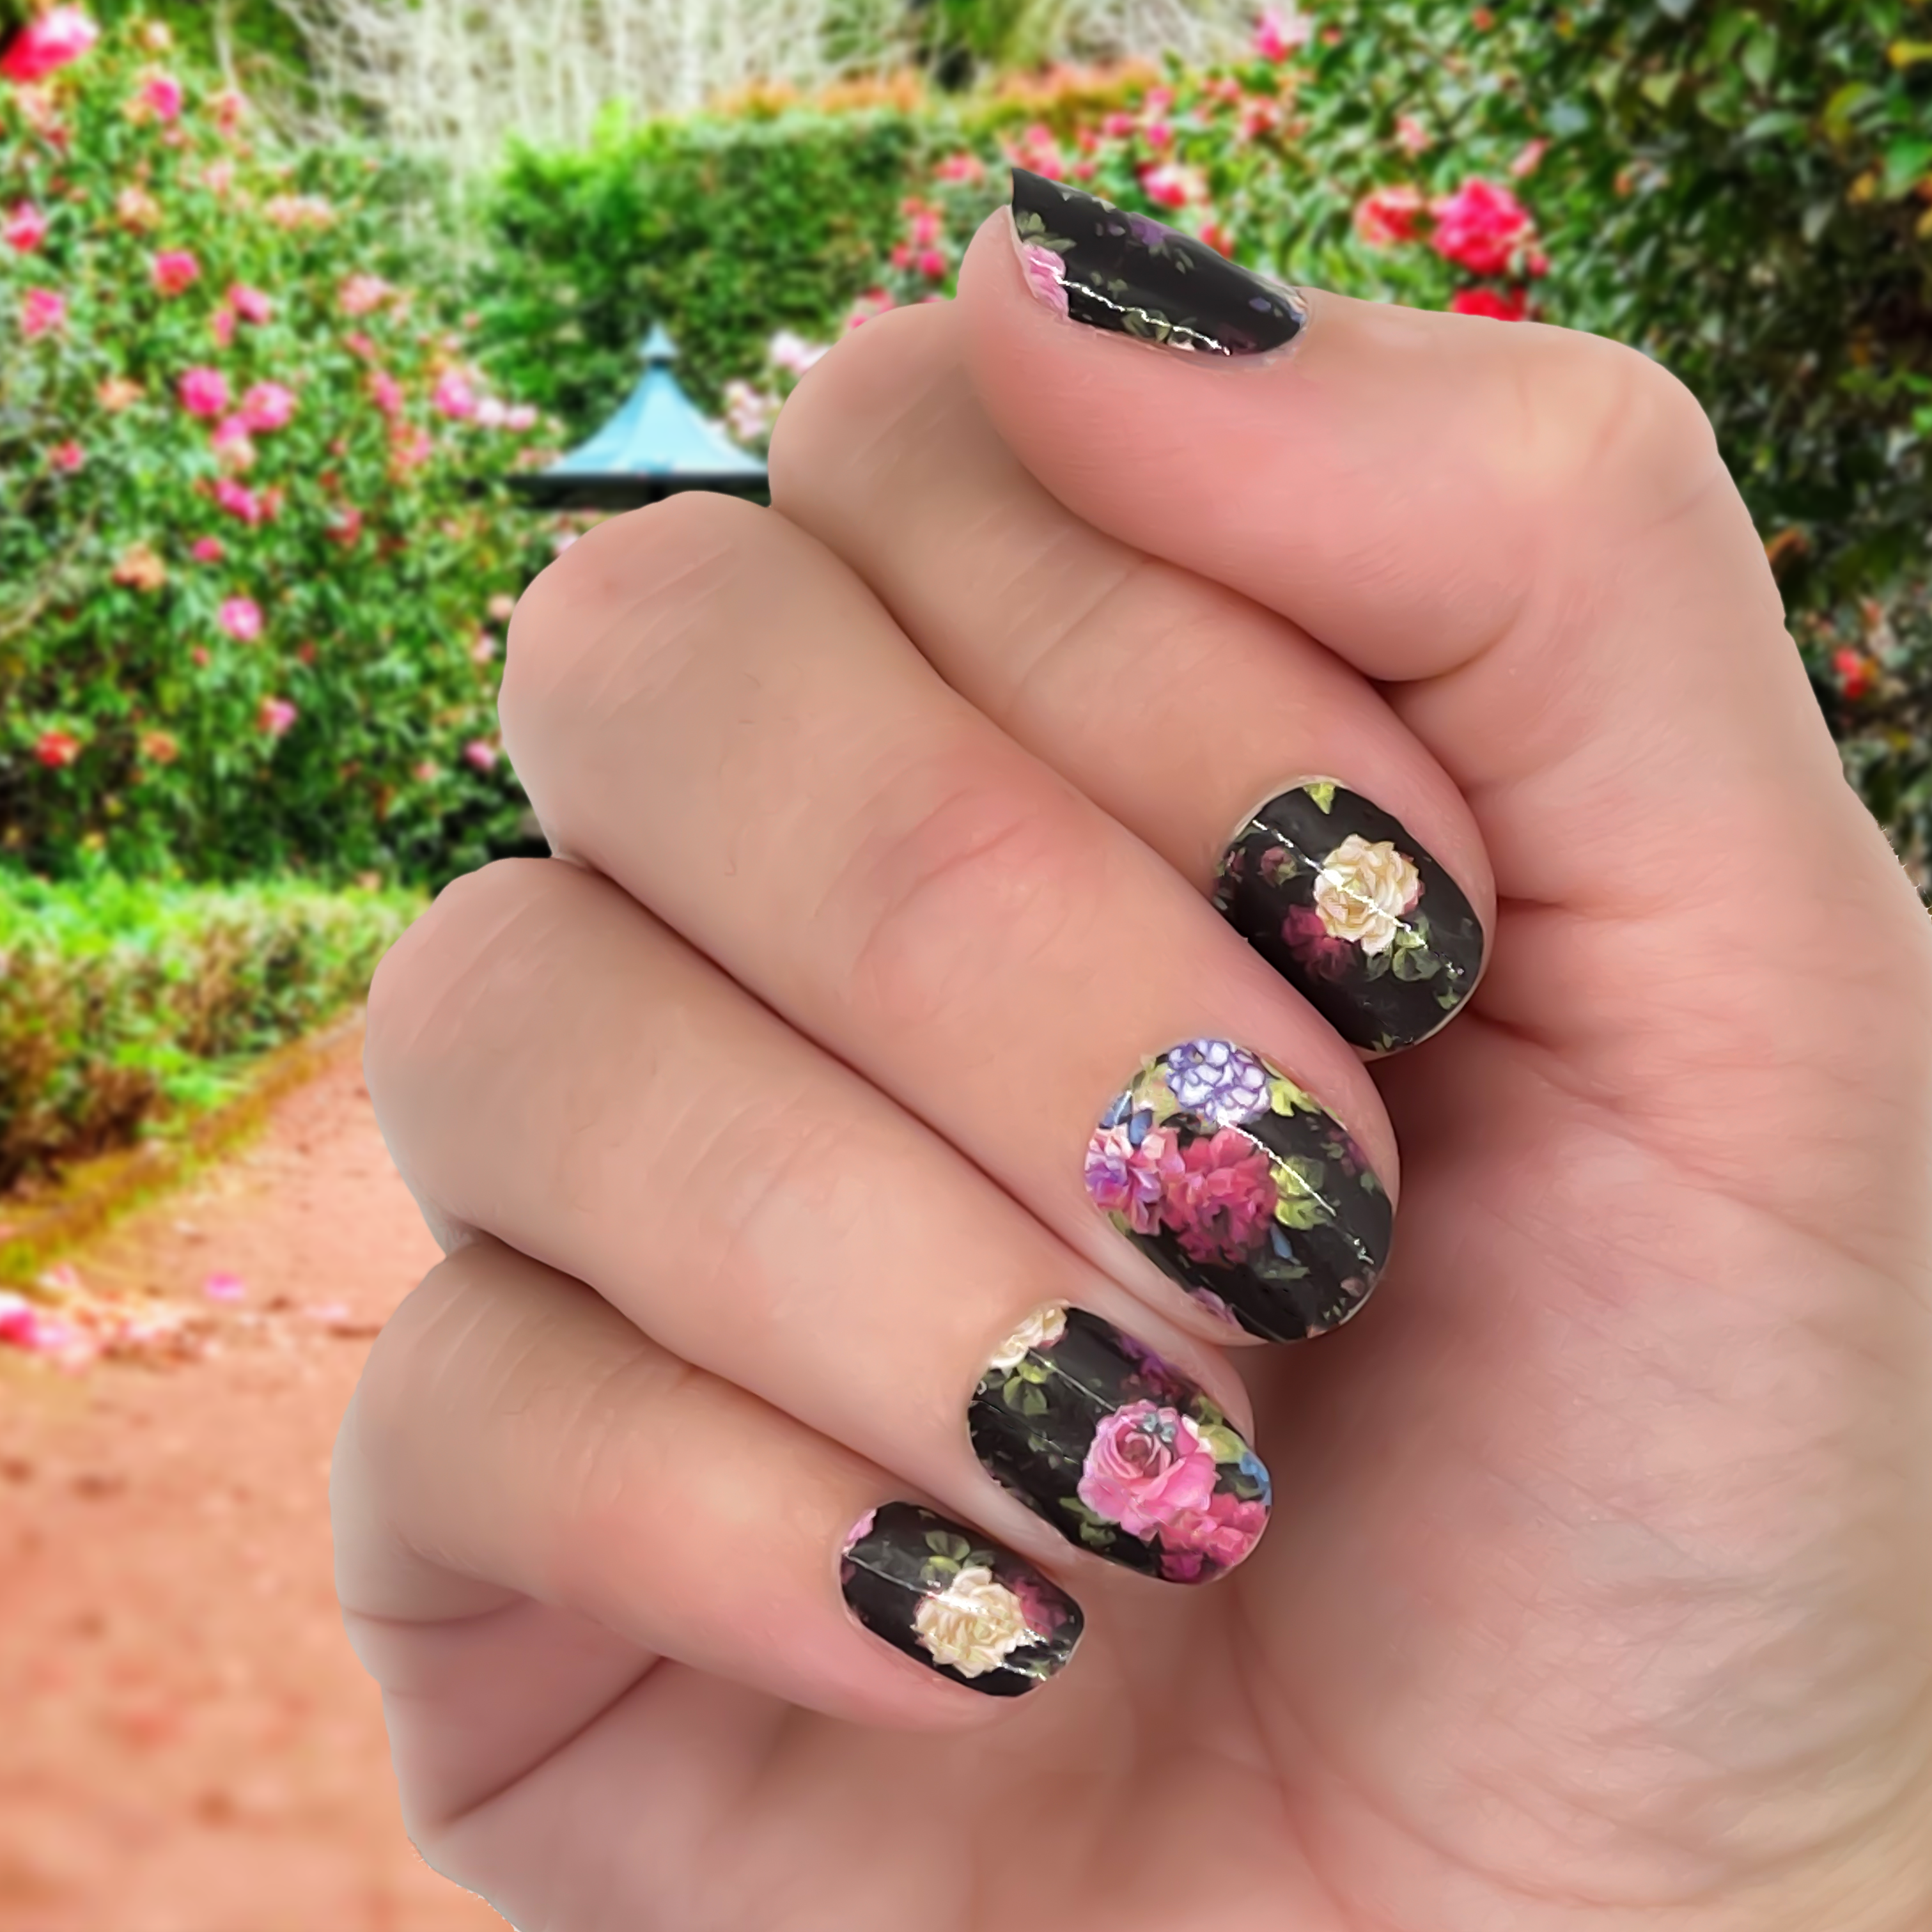 Nail Wrap - Smell The Roses